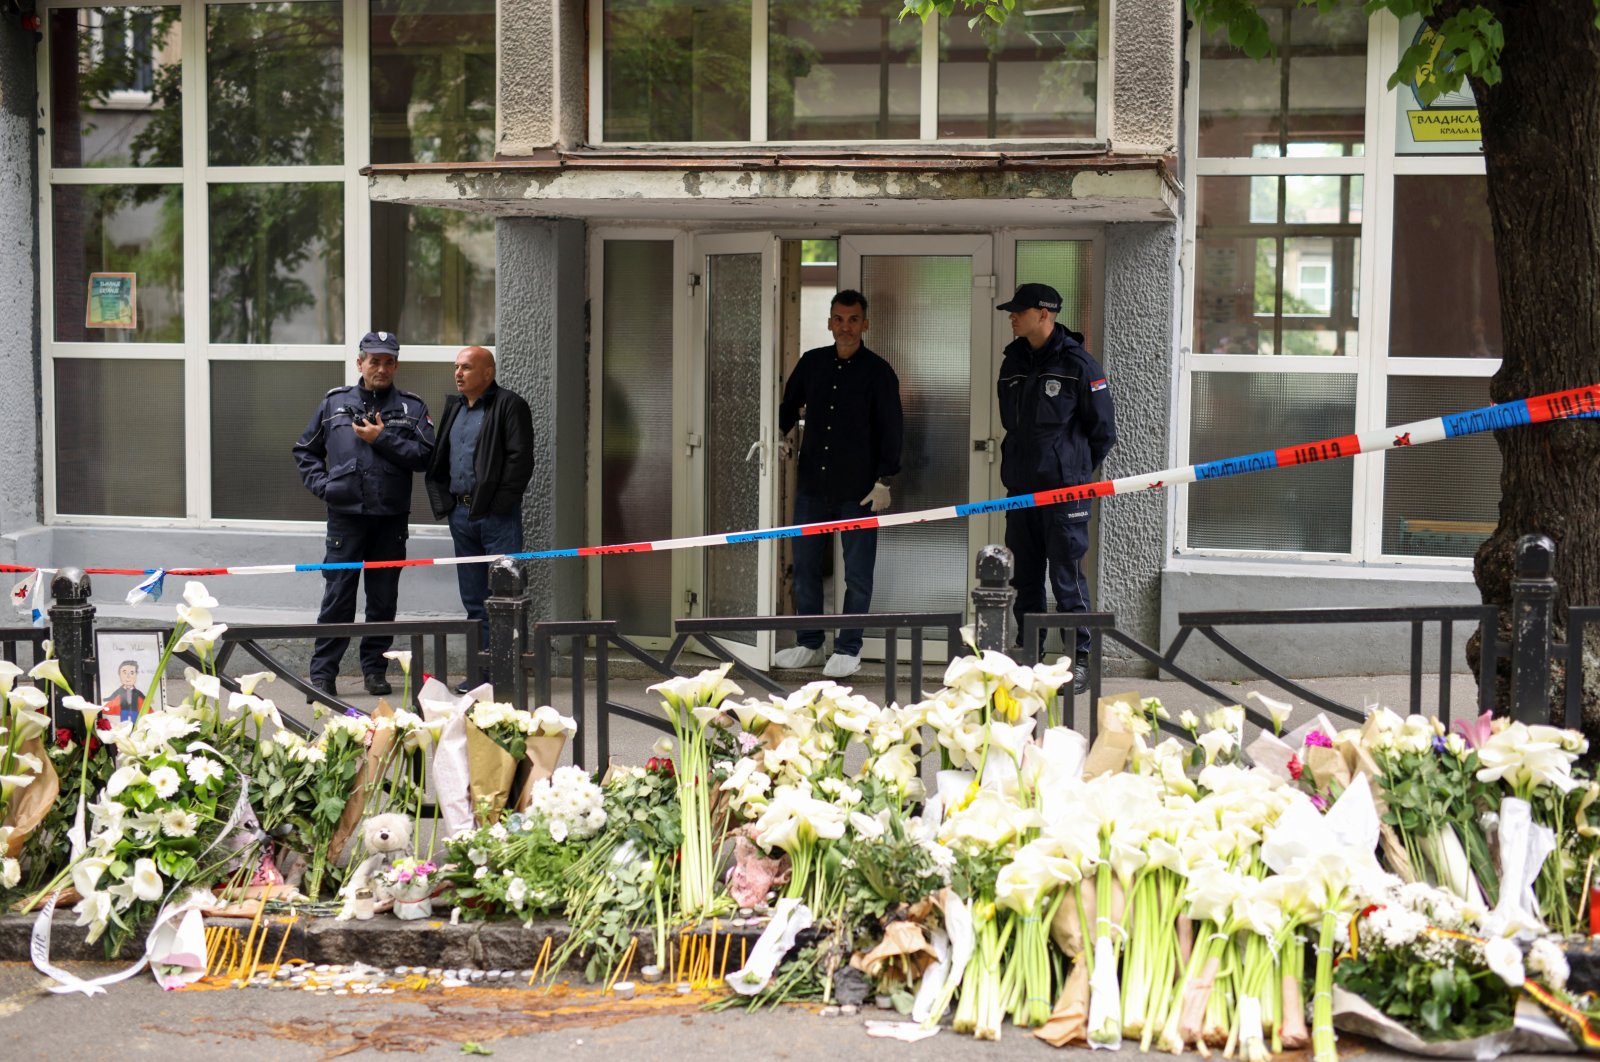 Police officers stand in front of the school where a mass shooting took place, after a boy opened fire on others, killing fellow students and staff in Belgrade, Serbia, May 4, 2023. (Reuters Photo)